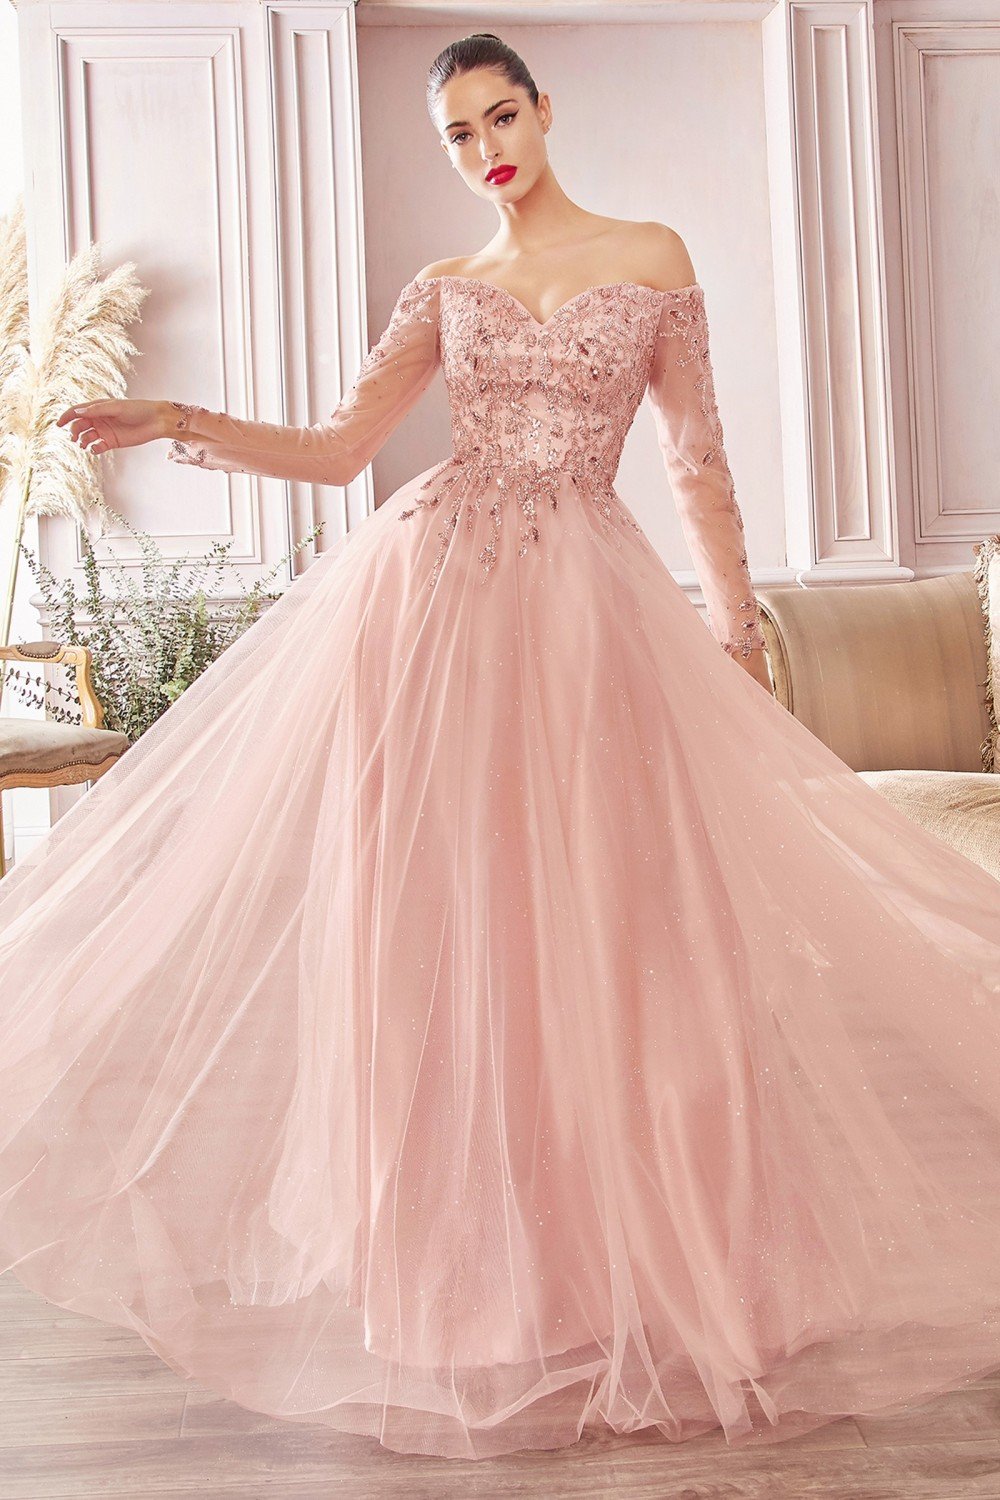 Ruffled Blush Pink Tulle Robe Dress with Long Sleeves - Lunss